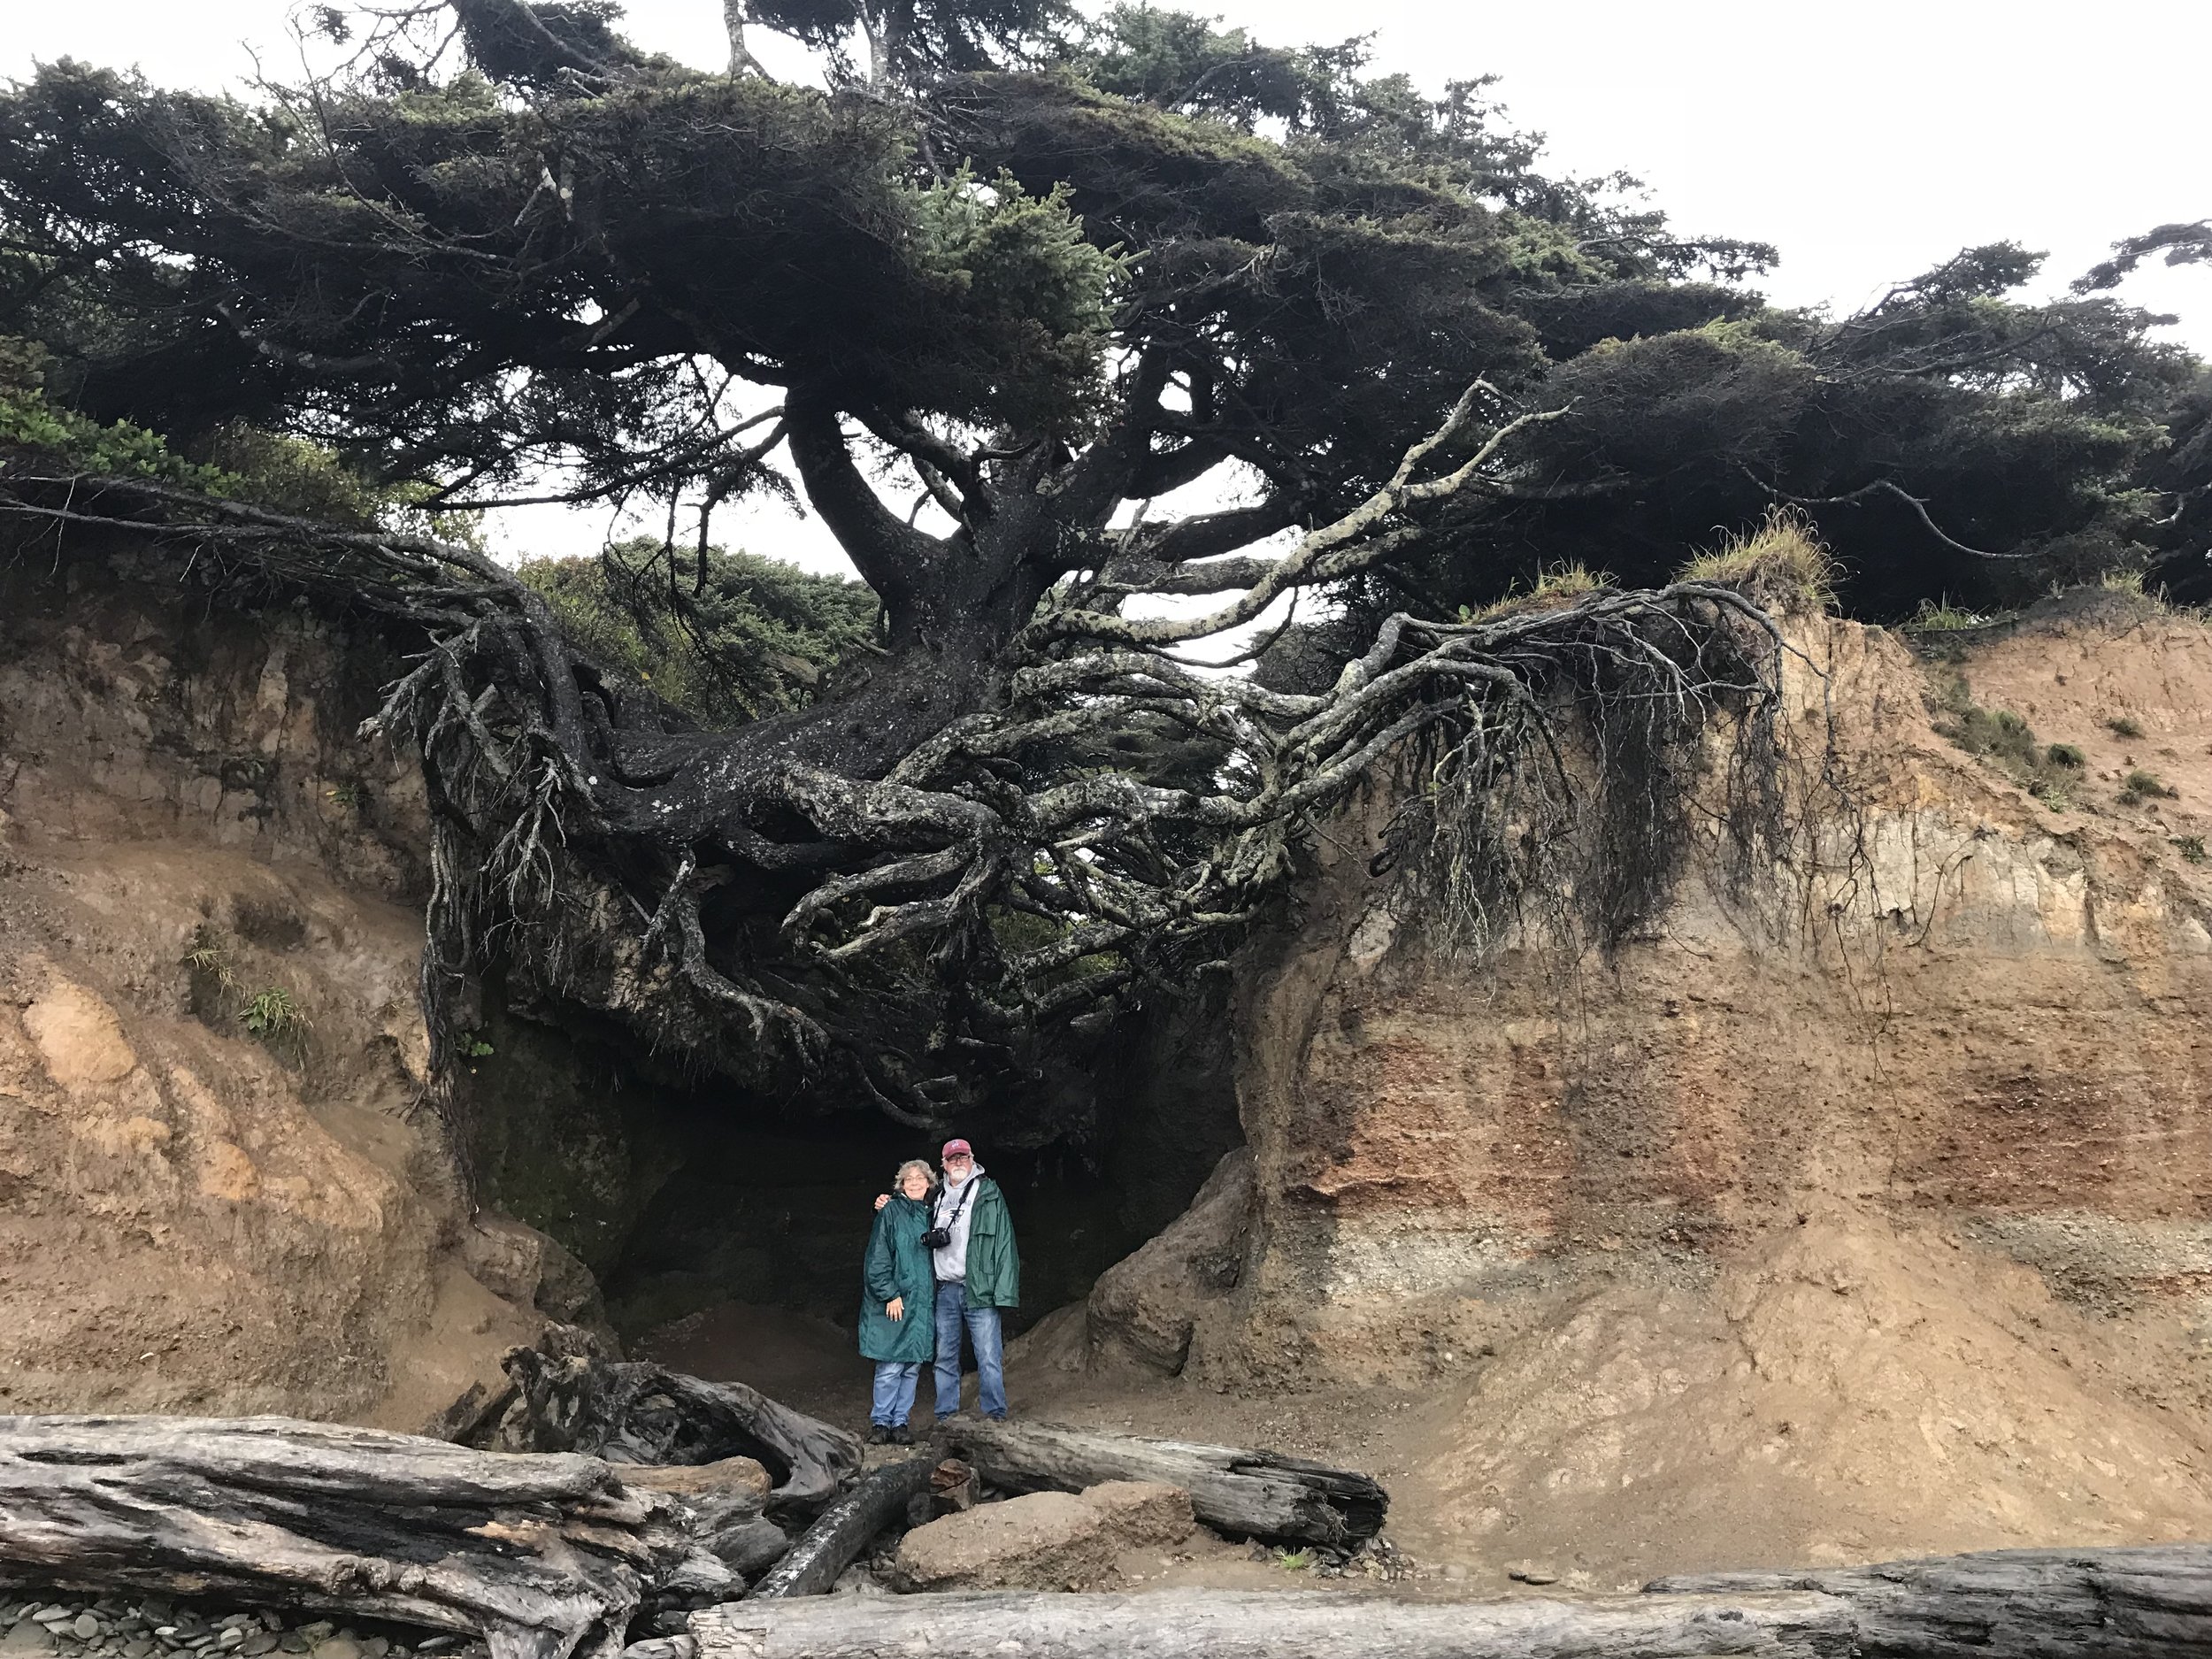  The “tree of life” somehow survives on the Washington coast despite its exposed roots. 